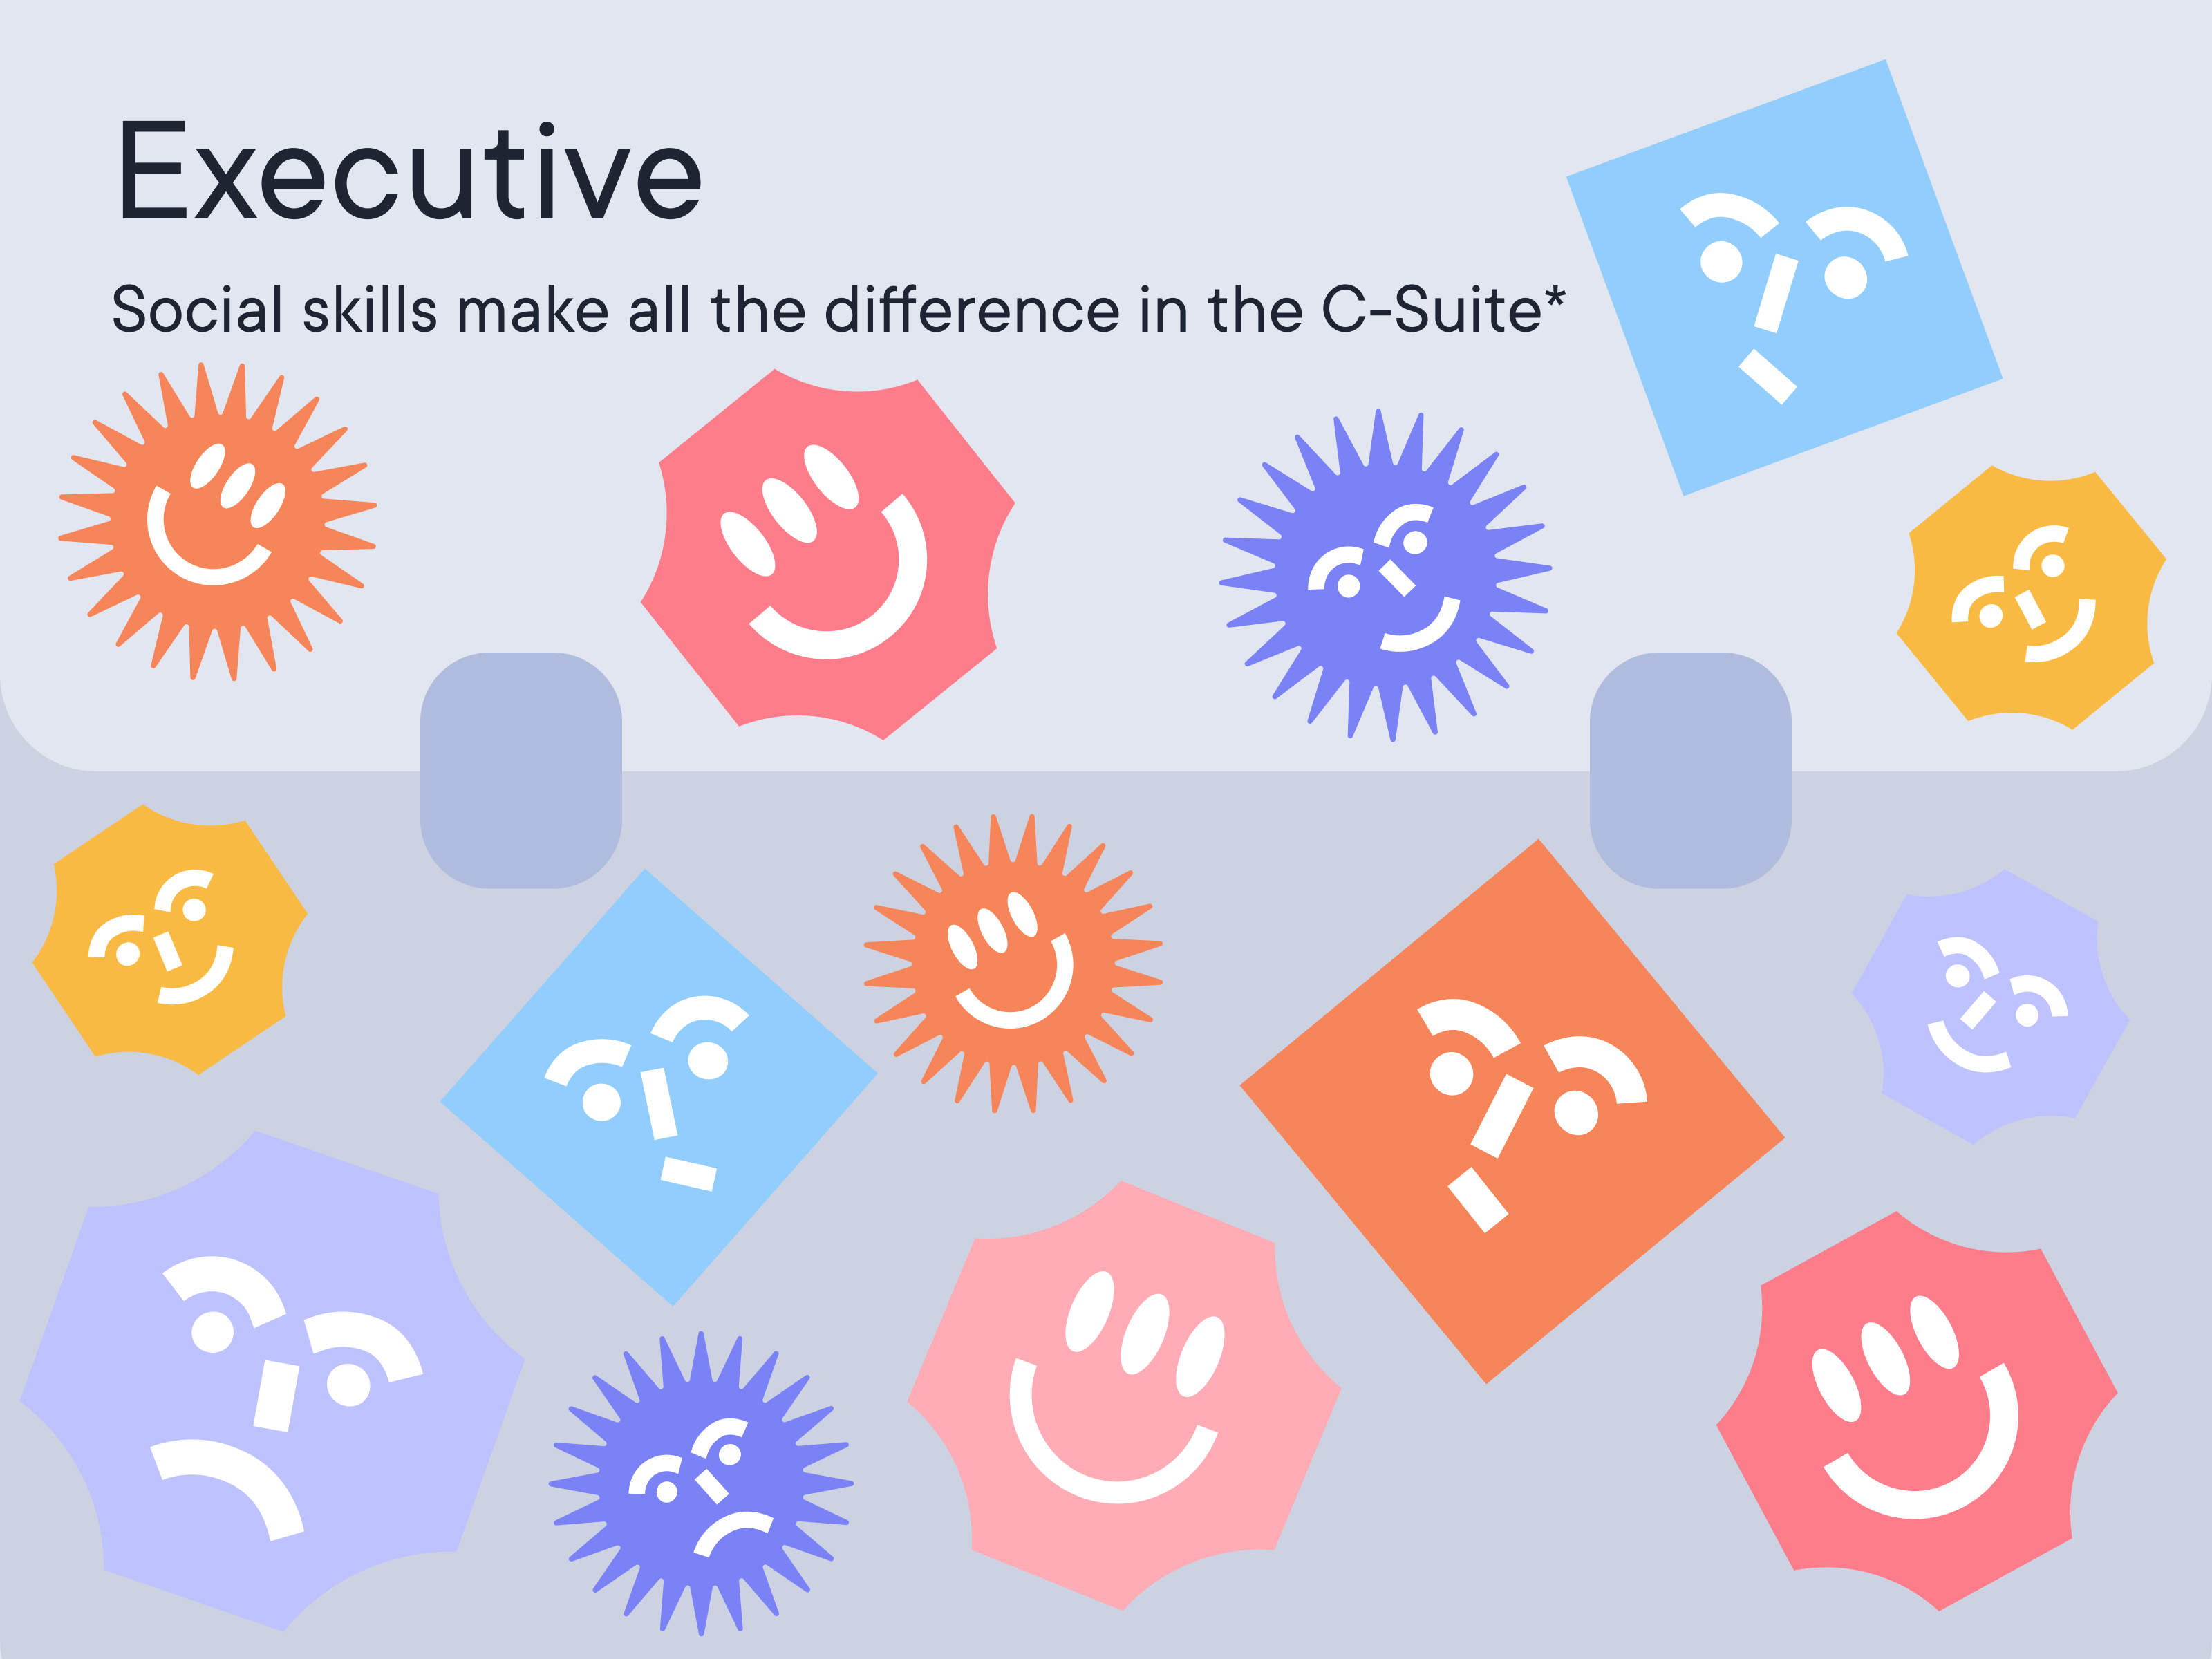 Social skills make all the difference in the C-Suite*